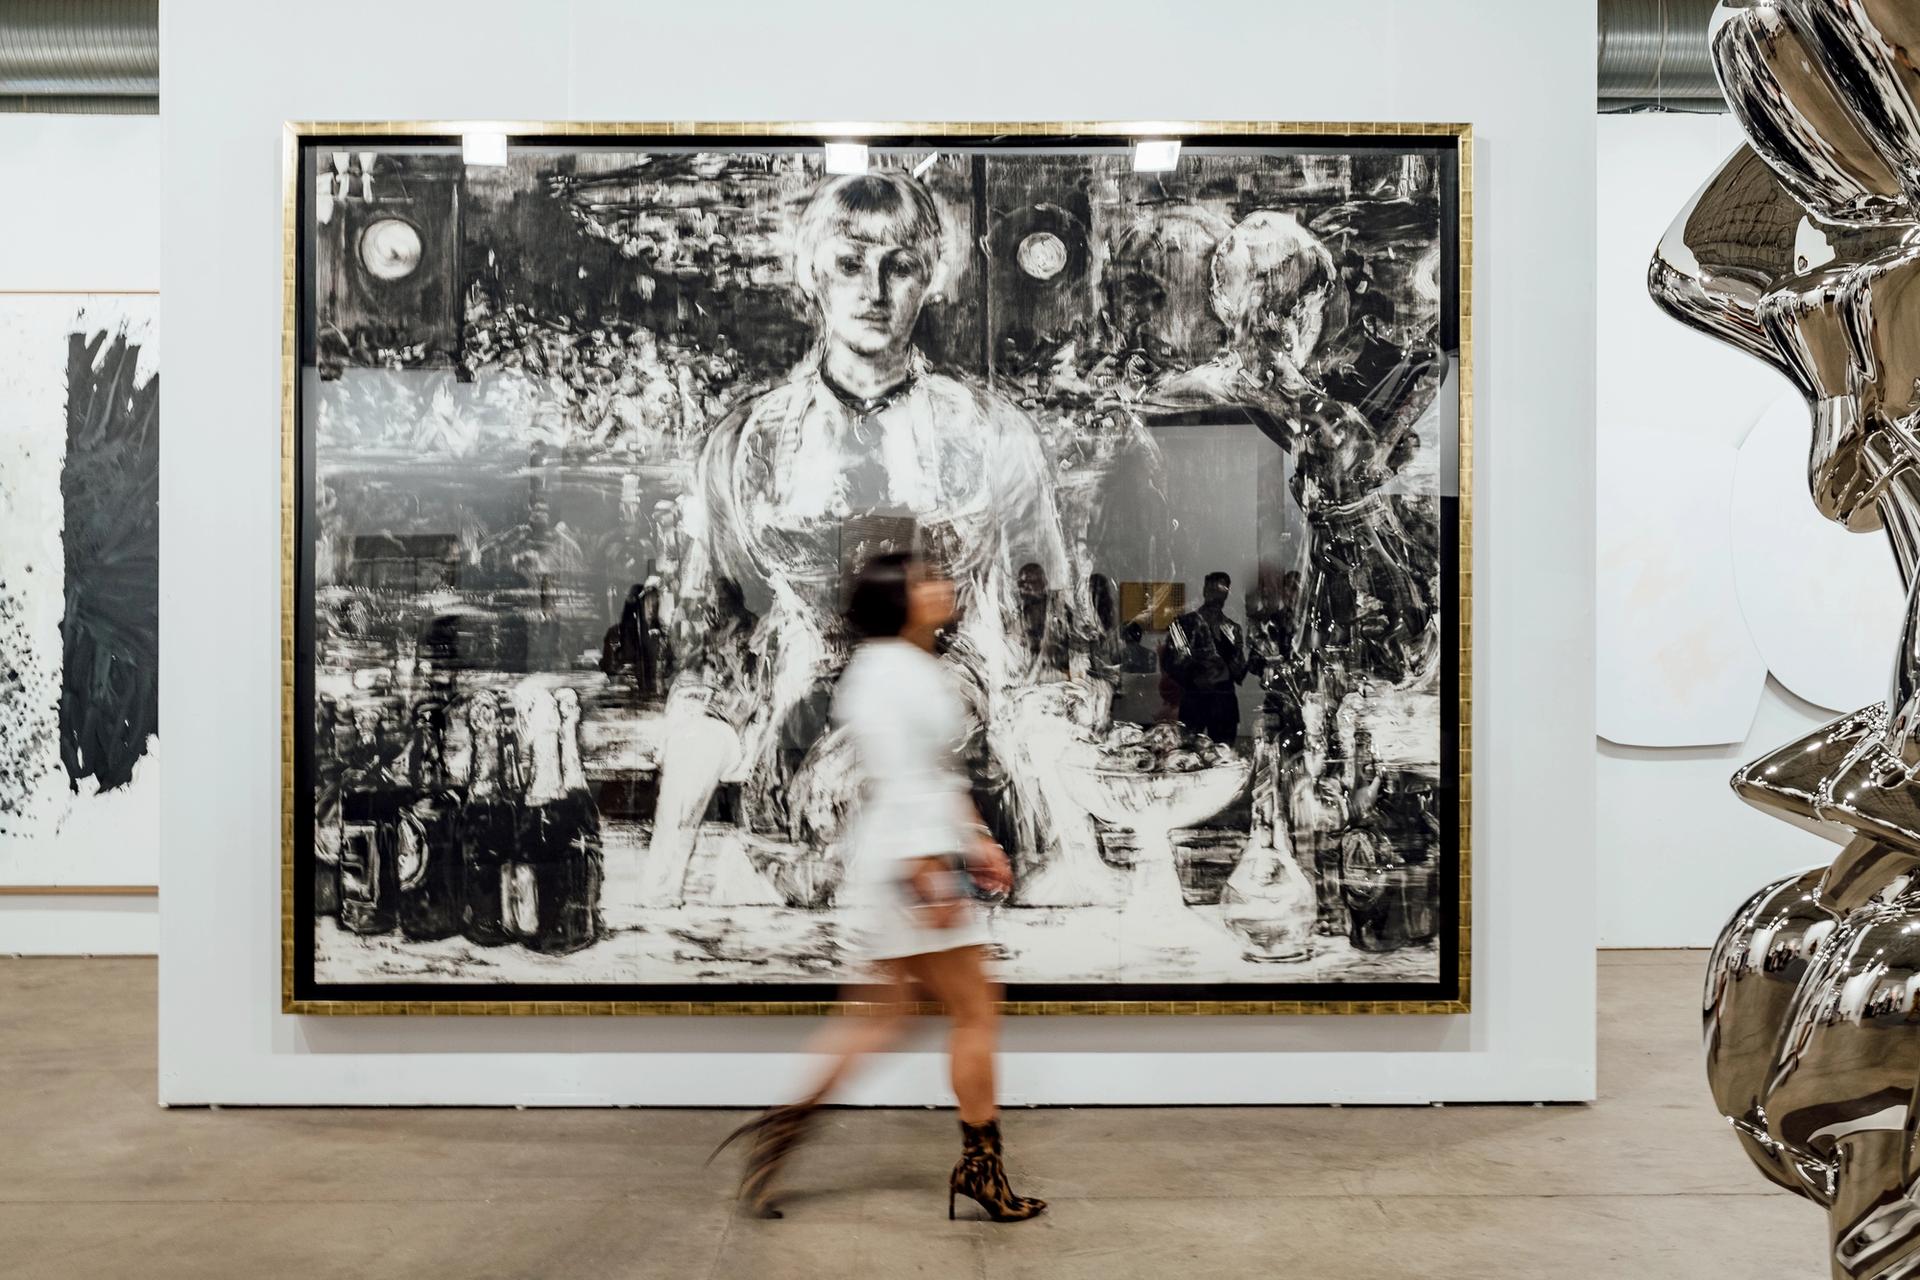 A fair-goer walks by first-time Expo exhibitor Galerie Thaddeus Ropac's booth. Photo by Kevin Serna, Courtesy of Galerie Thaddaeus Ropac (London, Paris, Salzburg) and Expo Chicago.